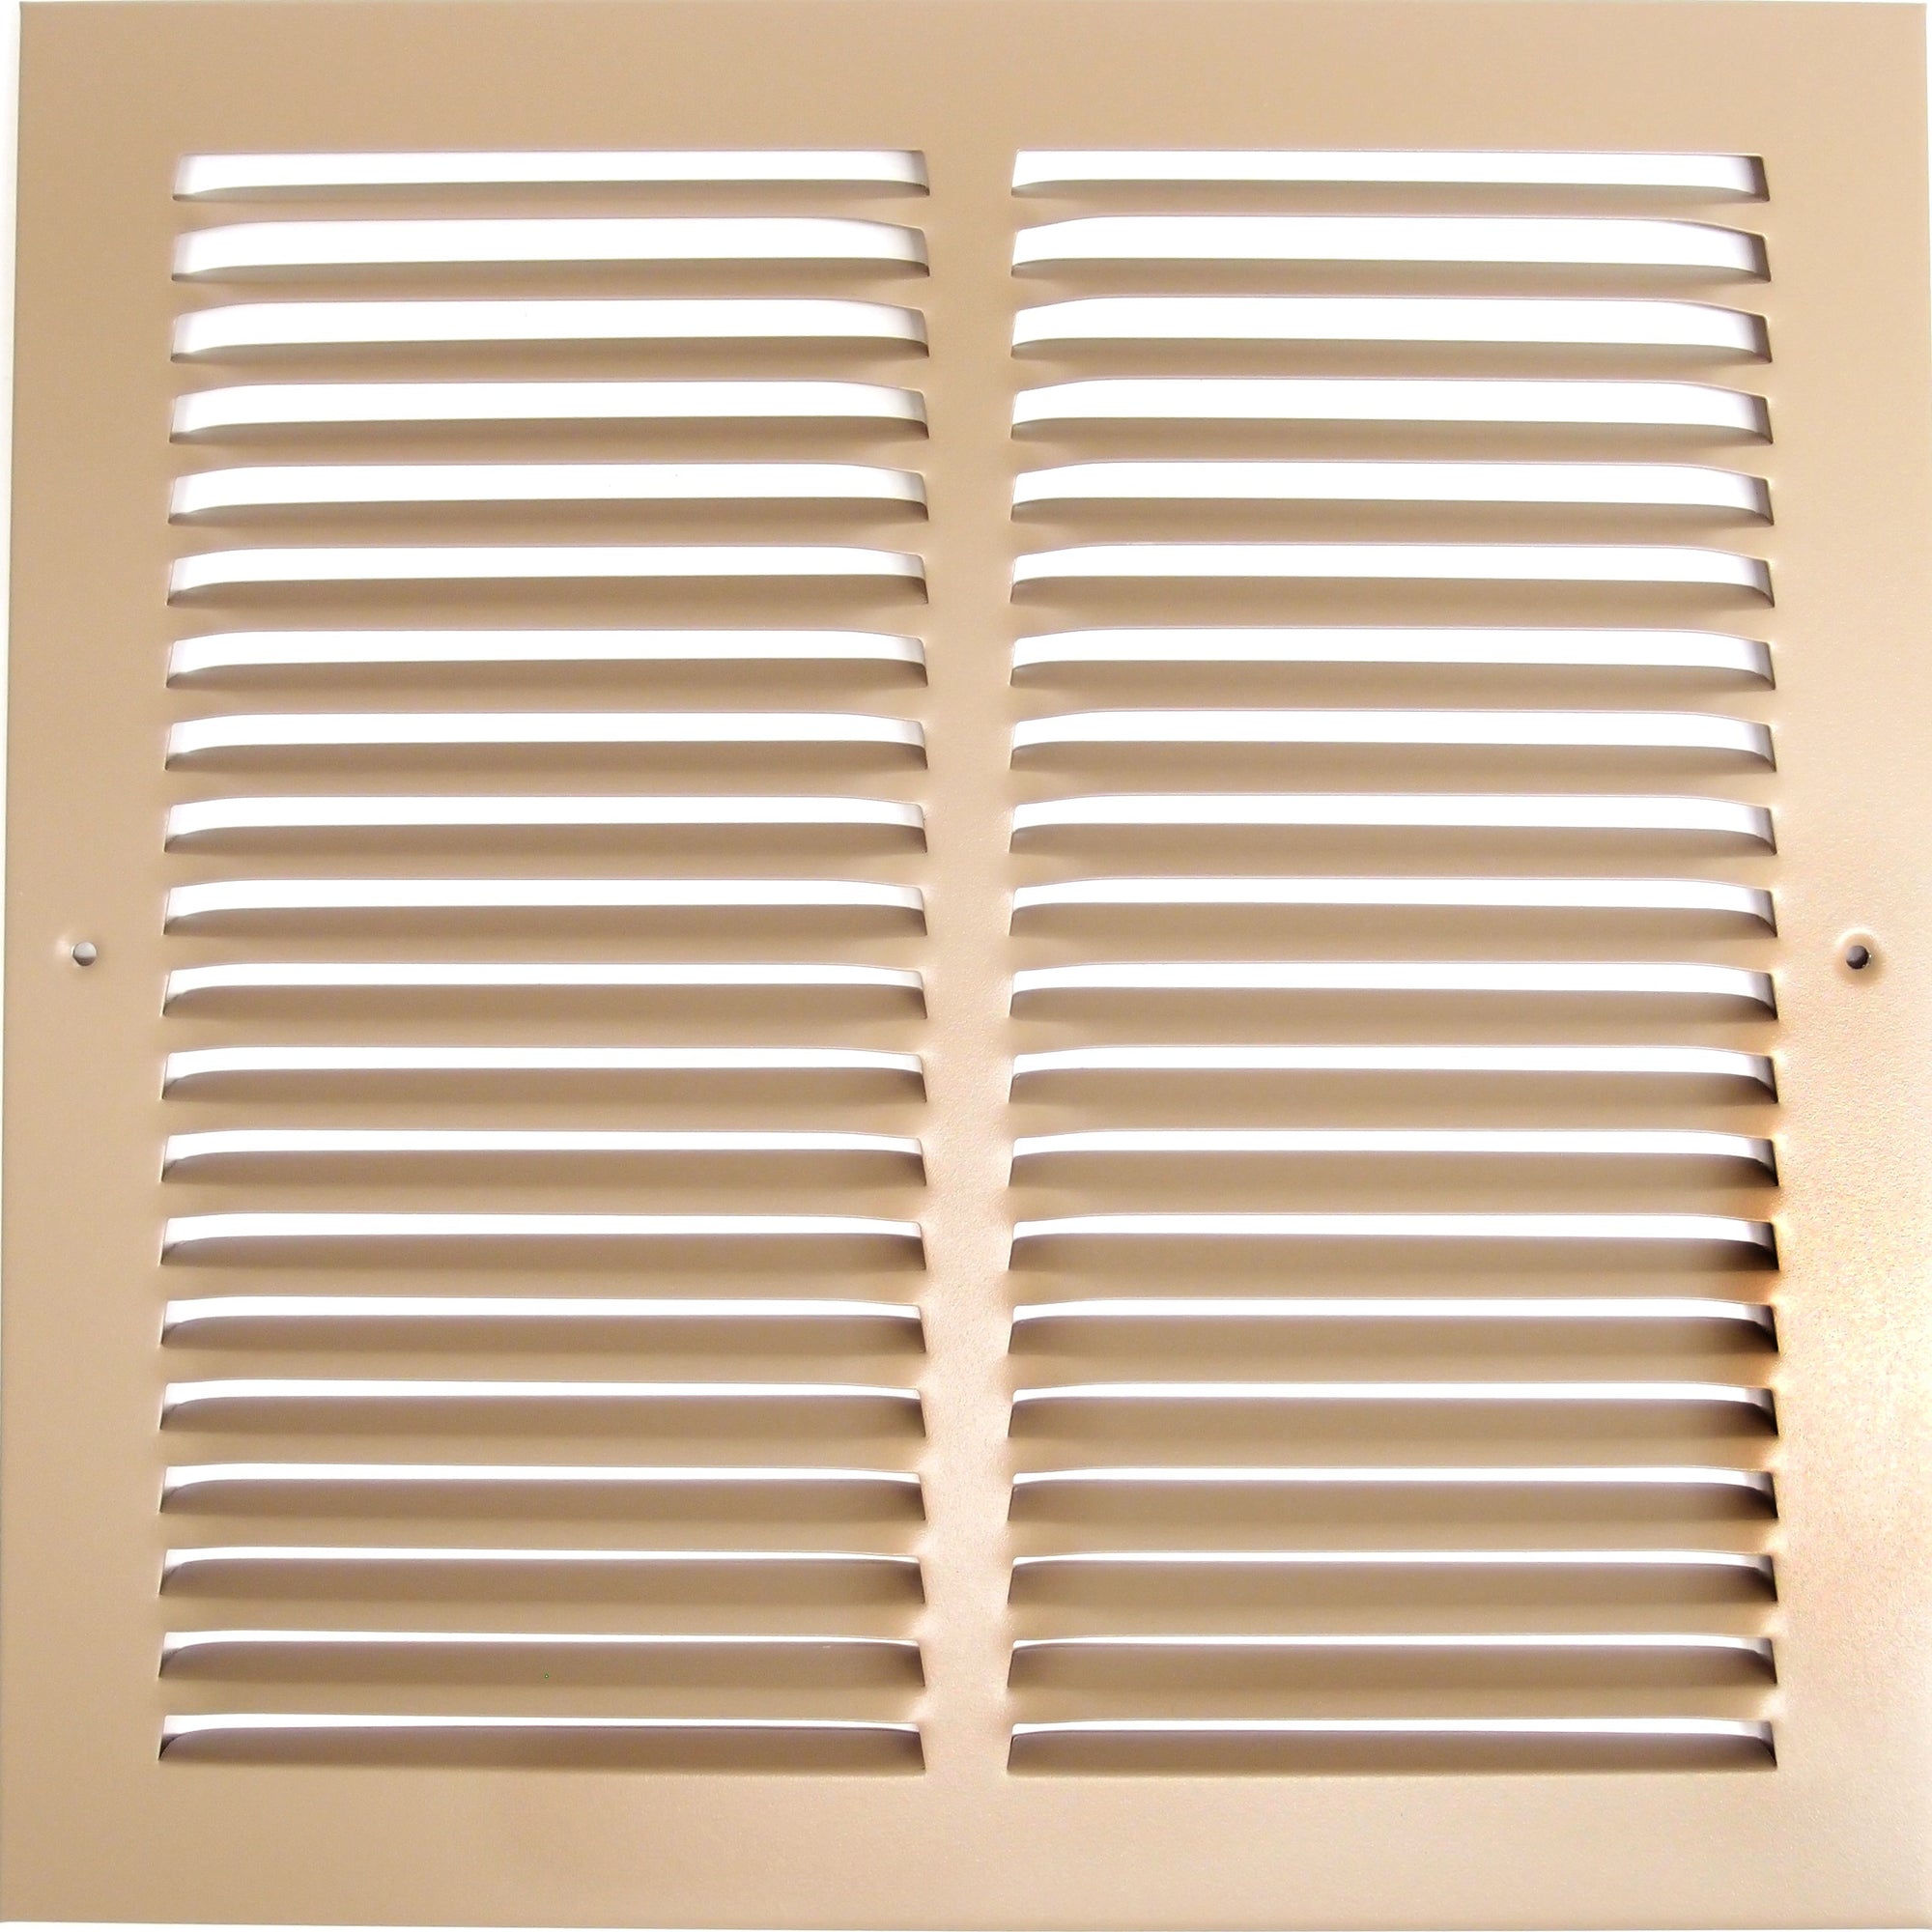 8" X 14" Air Vent Return Grilles - Sidewall and Ceiling - Steel